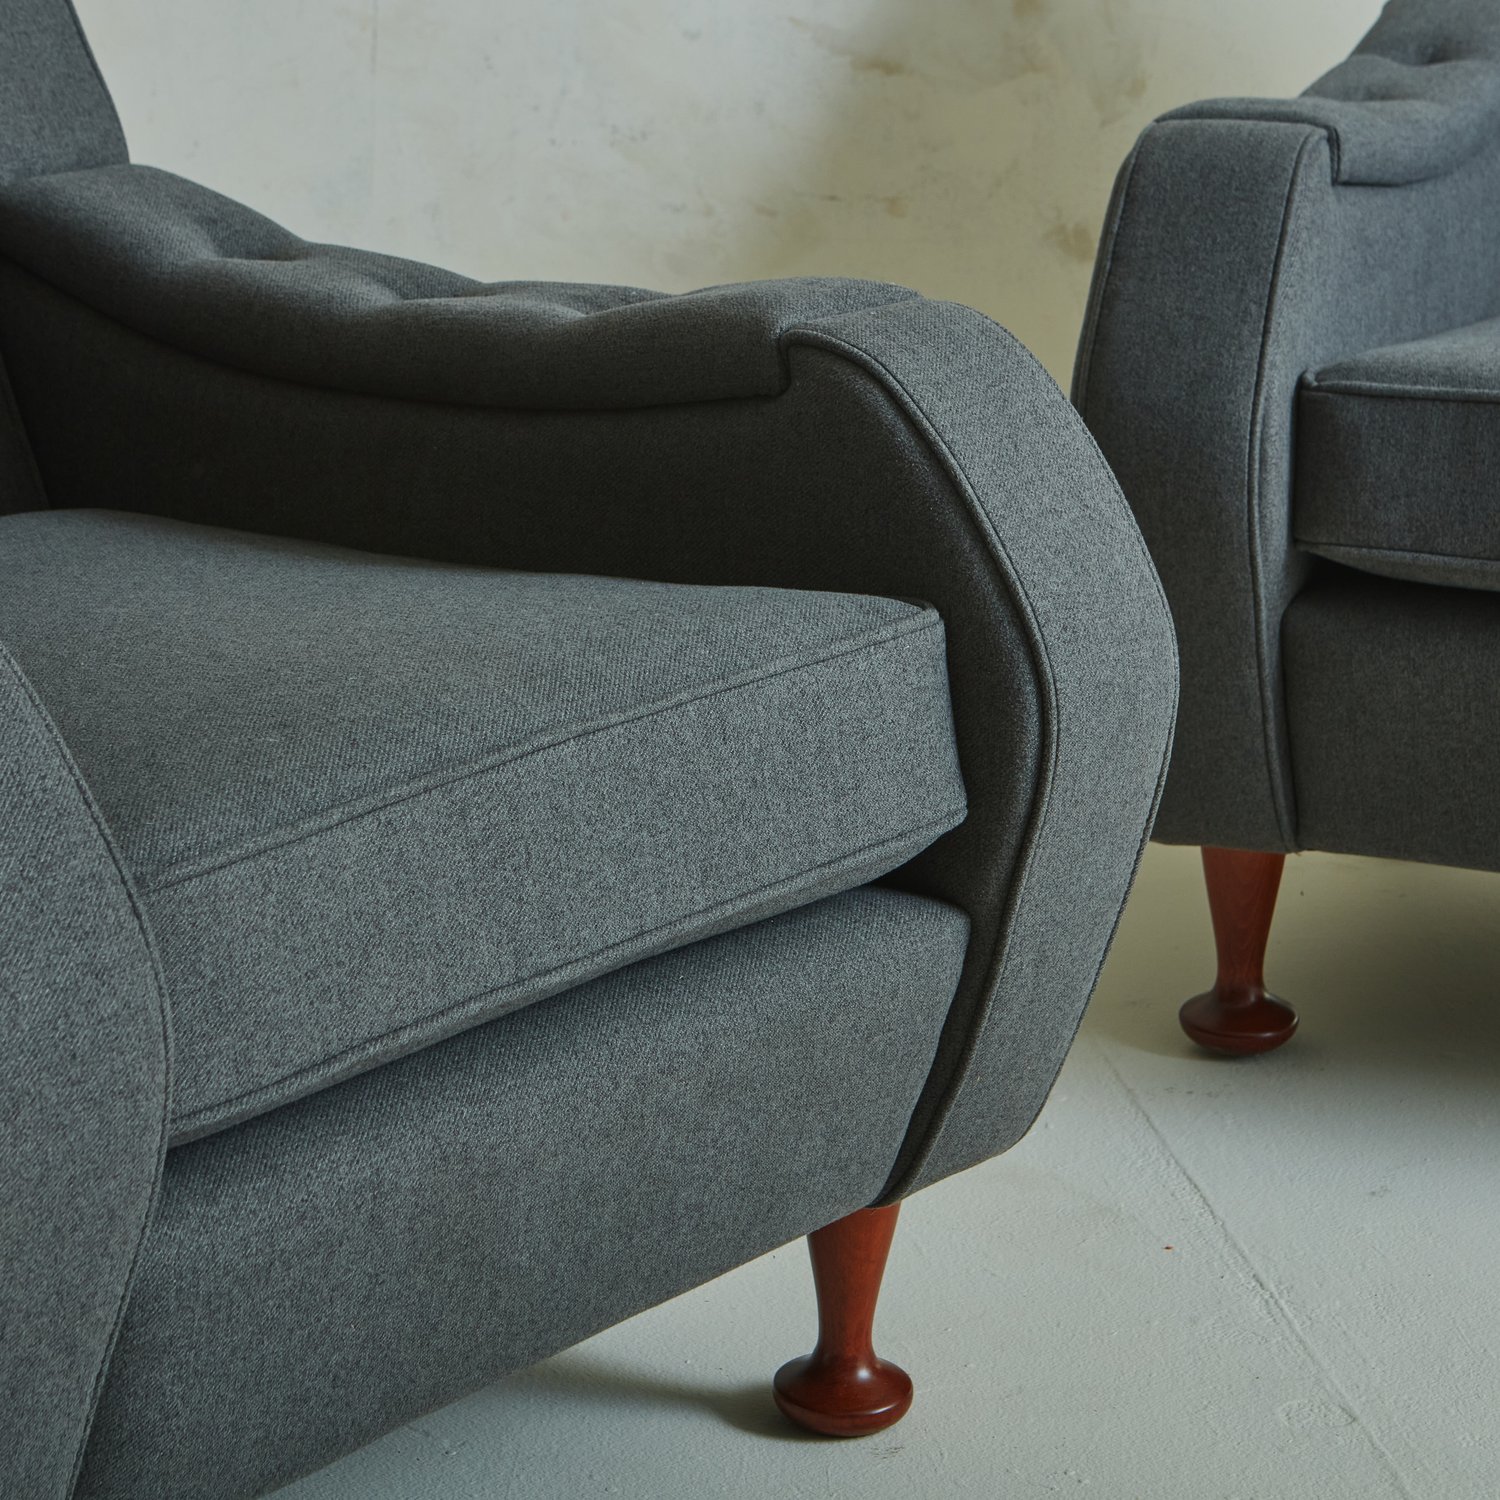 Angelo of of Italian Mangiarotti, Lounge Pair Loft 1970s Chairs South In Style the in Gray Wool Loop —